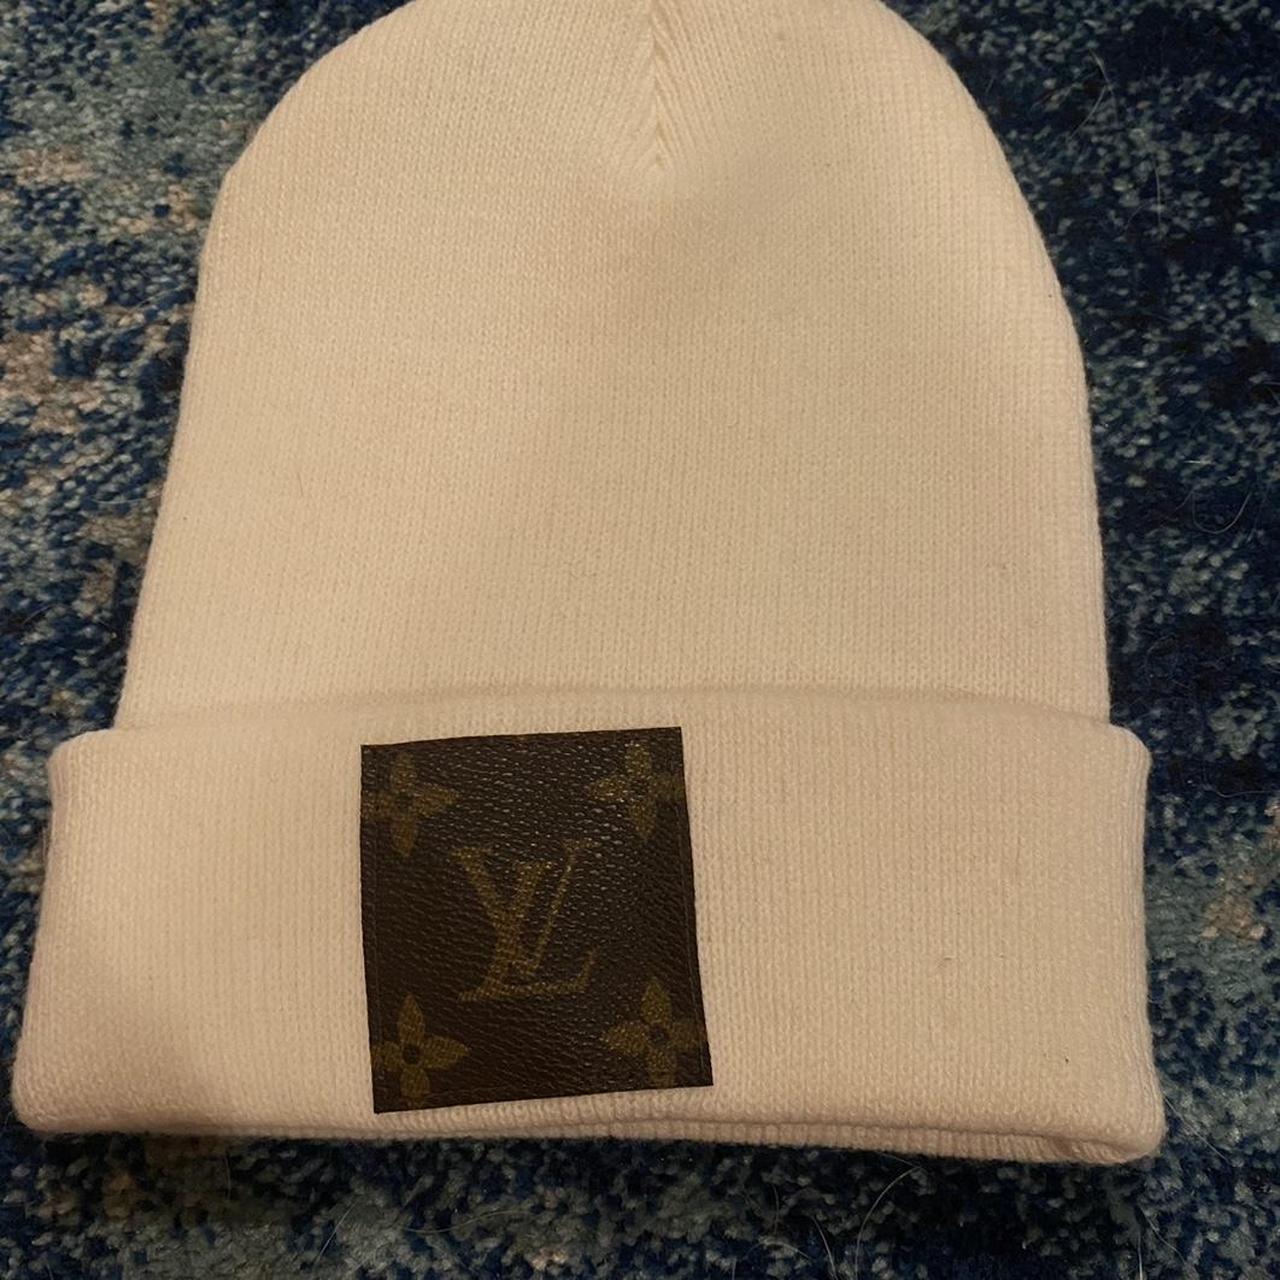 🚨 EXTREMELY RARE 🚨 Louis Vuitton Beanie & Scarf. - Depop